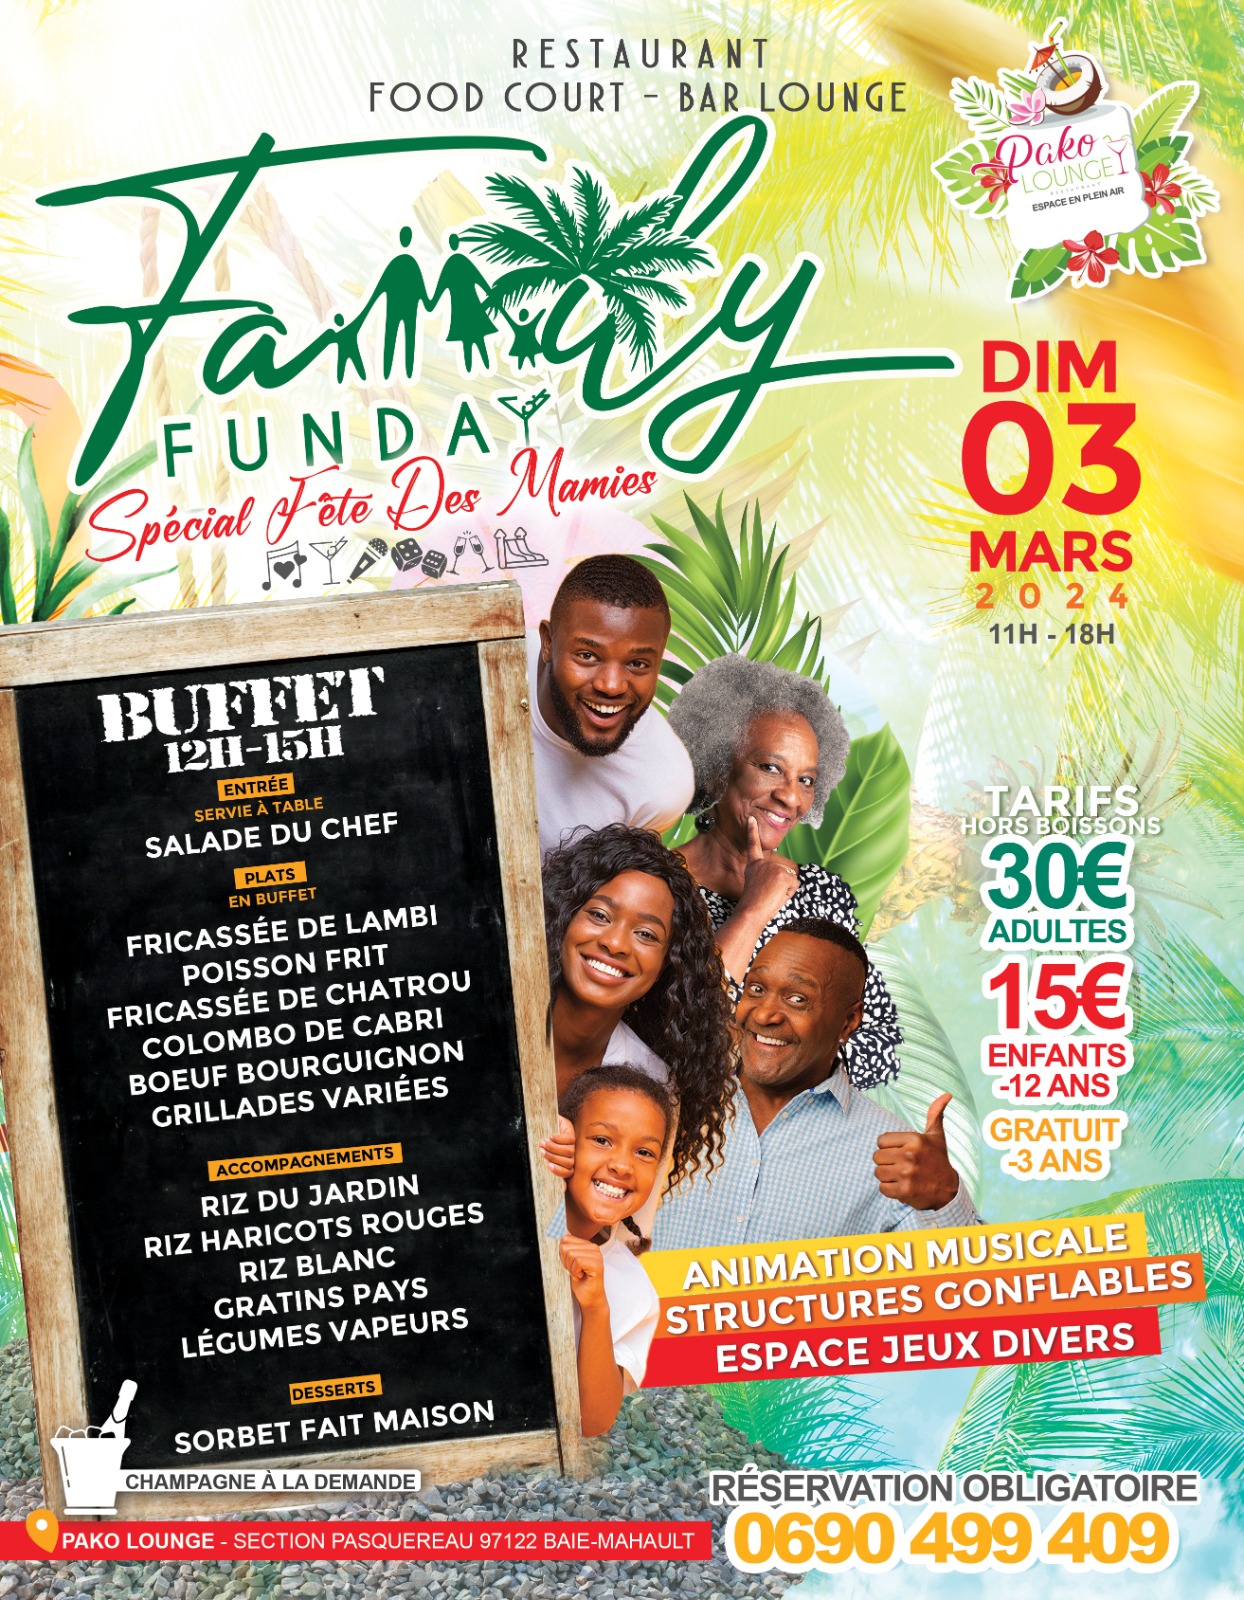 FAMILY FUNDAY - SPECIAL FETE DES MAMIES